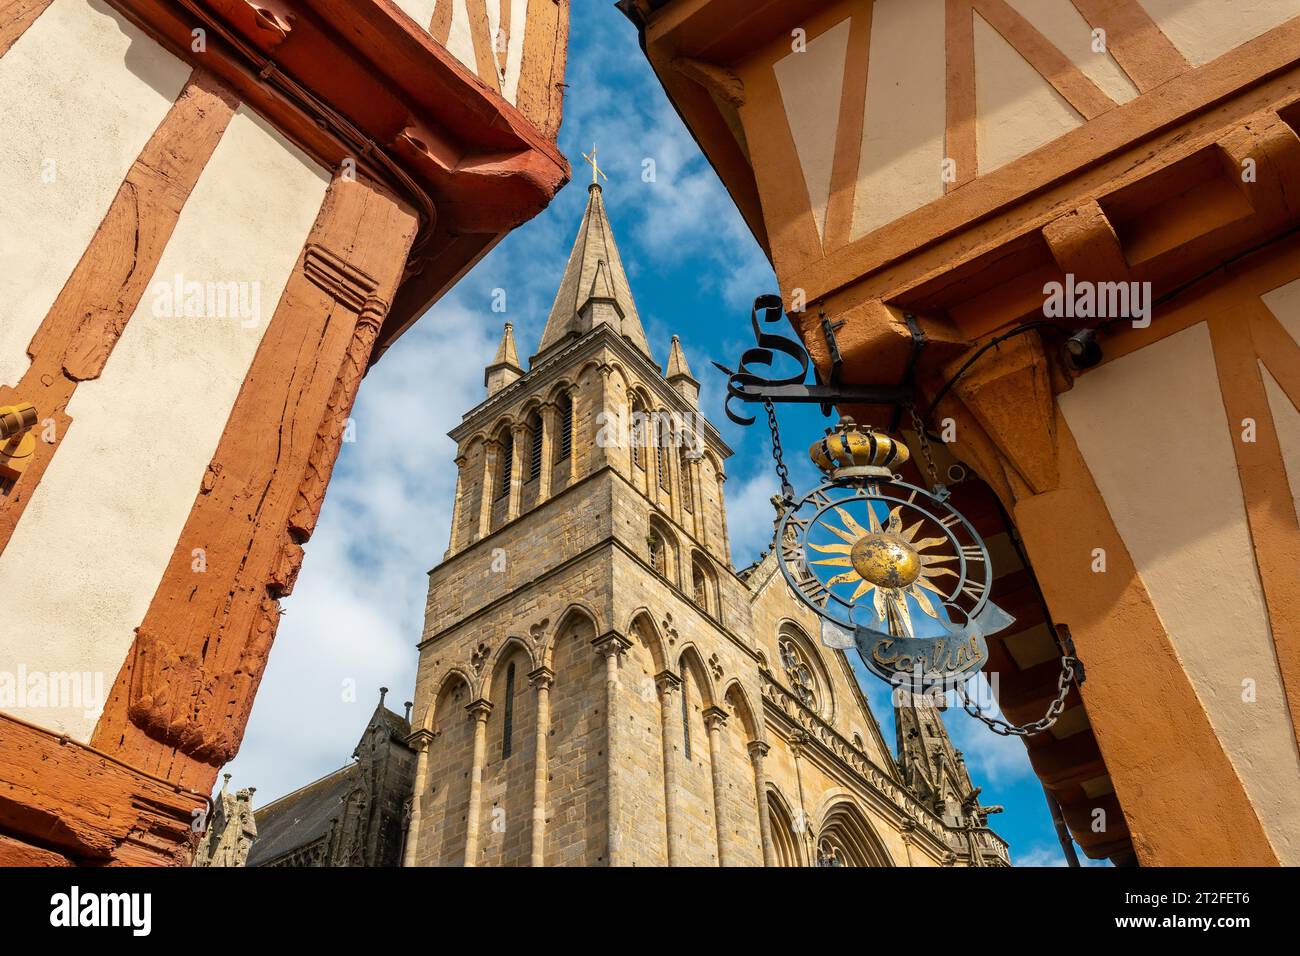 Vannes medieval coastal town, old wooden houses and St. Peter's Cathedral Basilica, Morbihan department, Brittany, France Stock Photo